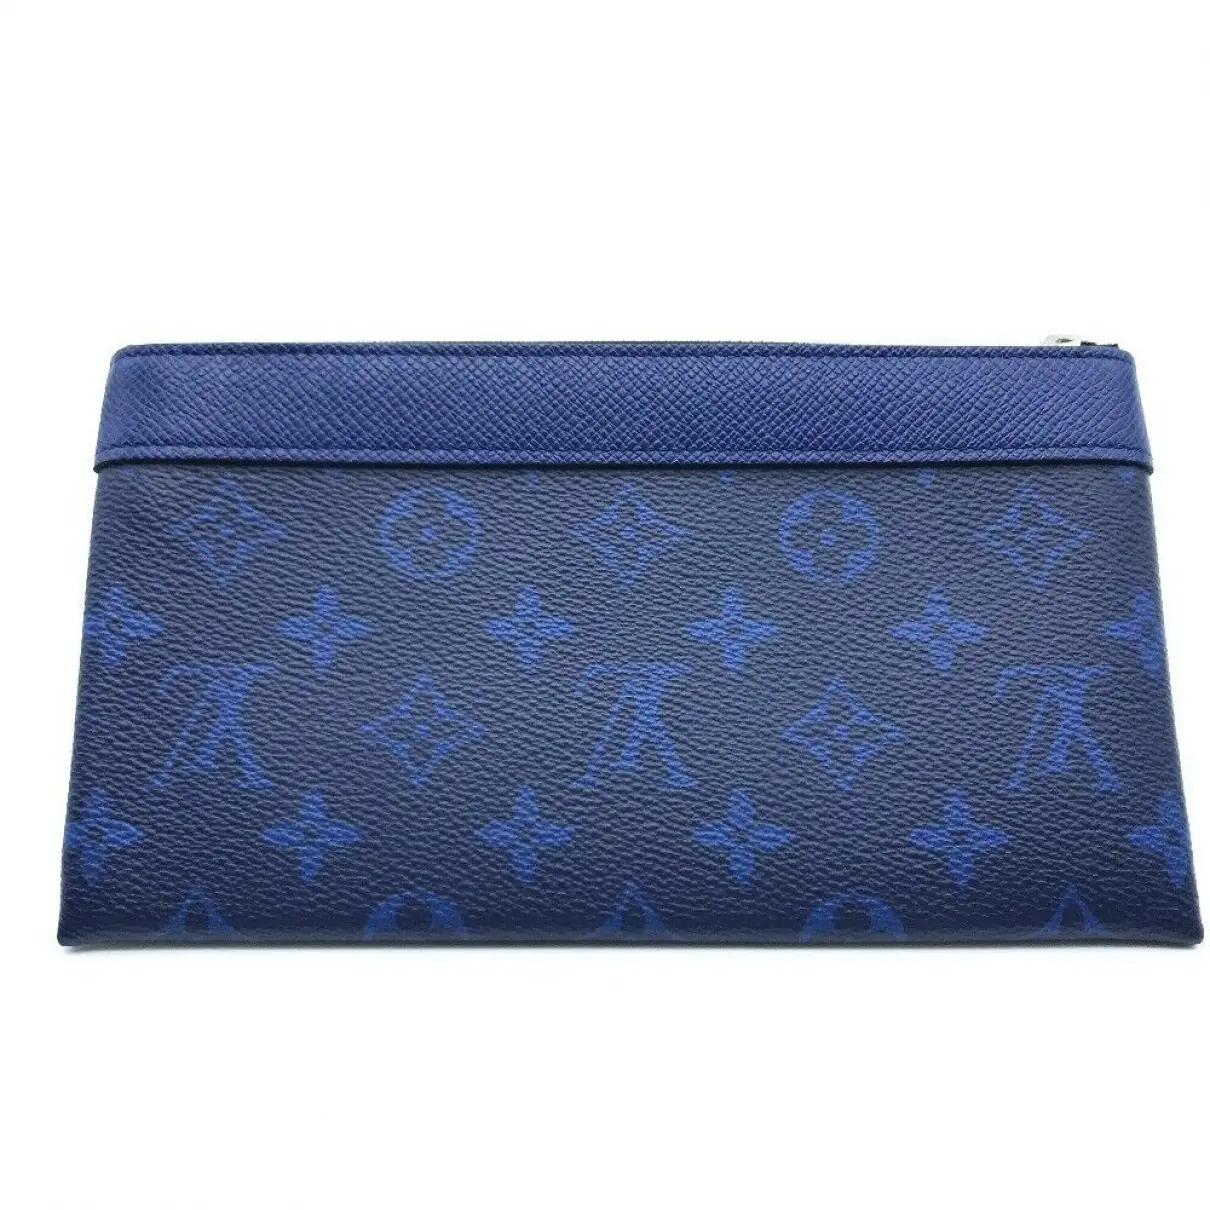 Buy Louis Vuitton Discovery cloth small bag online